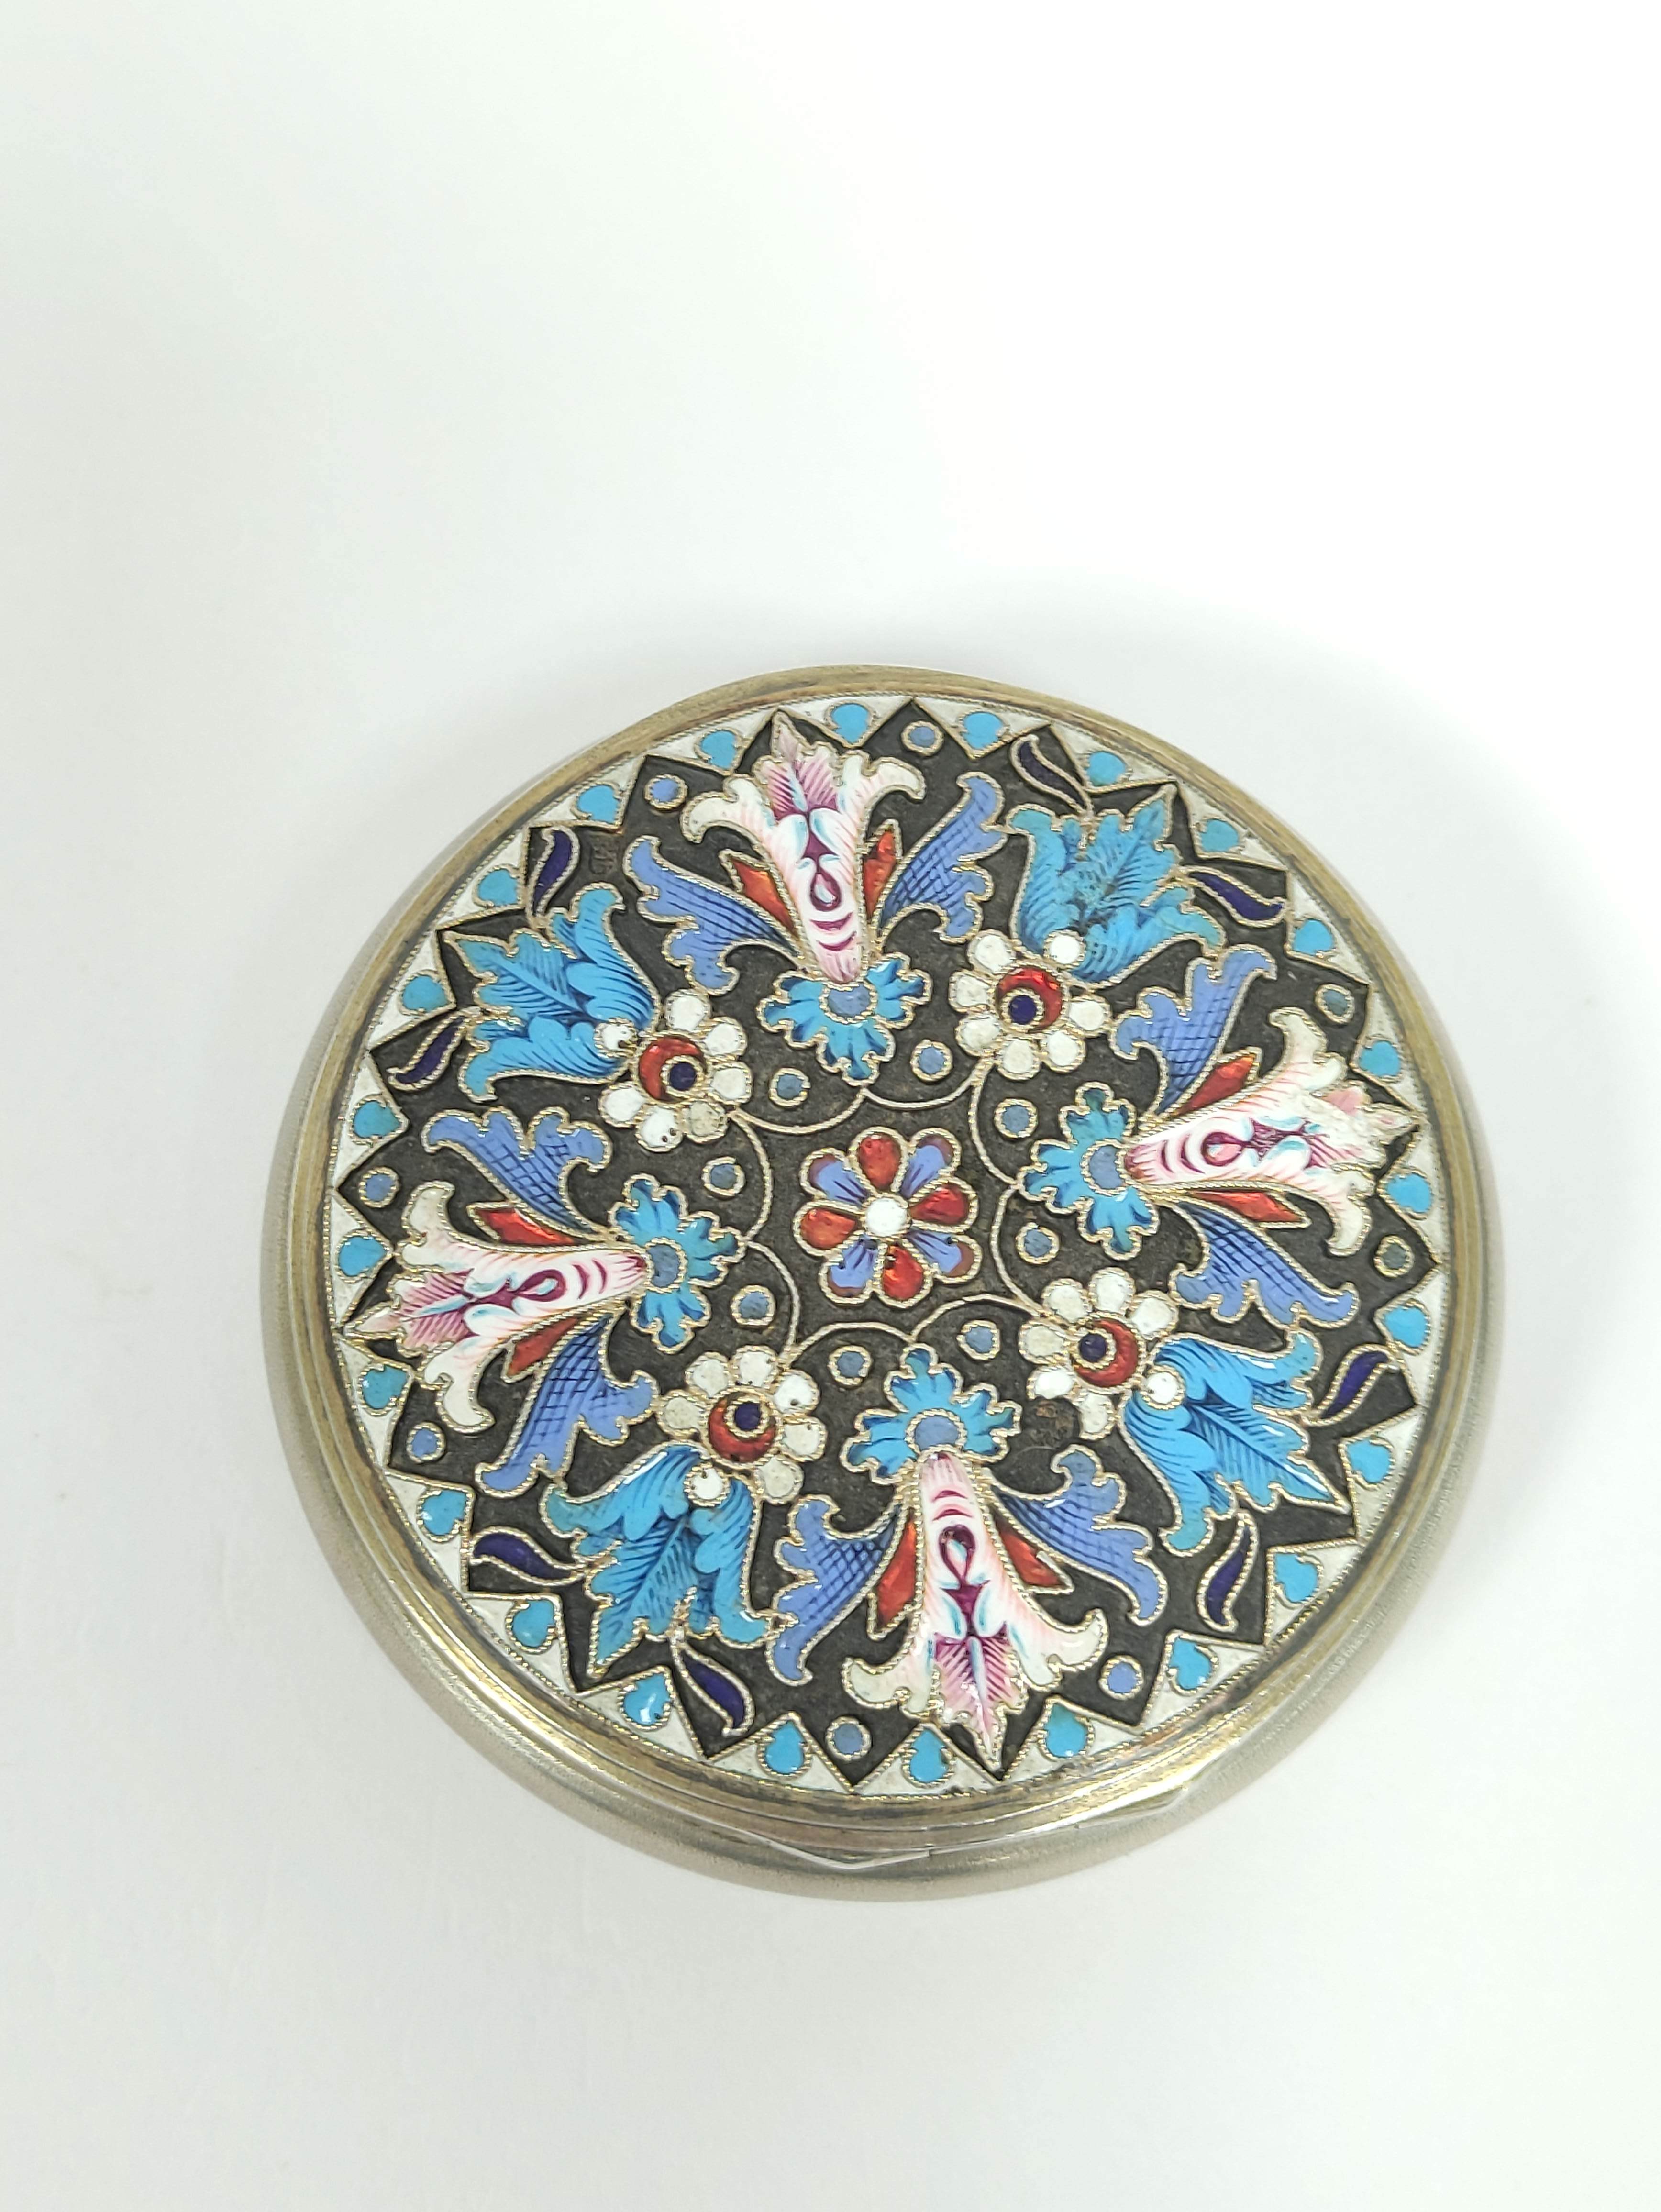 Faberge silver gilt and enamel circular box with angular sides and cover in blue, white pink and - Image 6 of 6